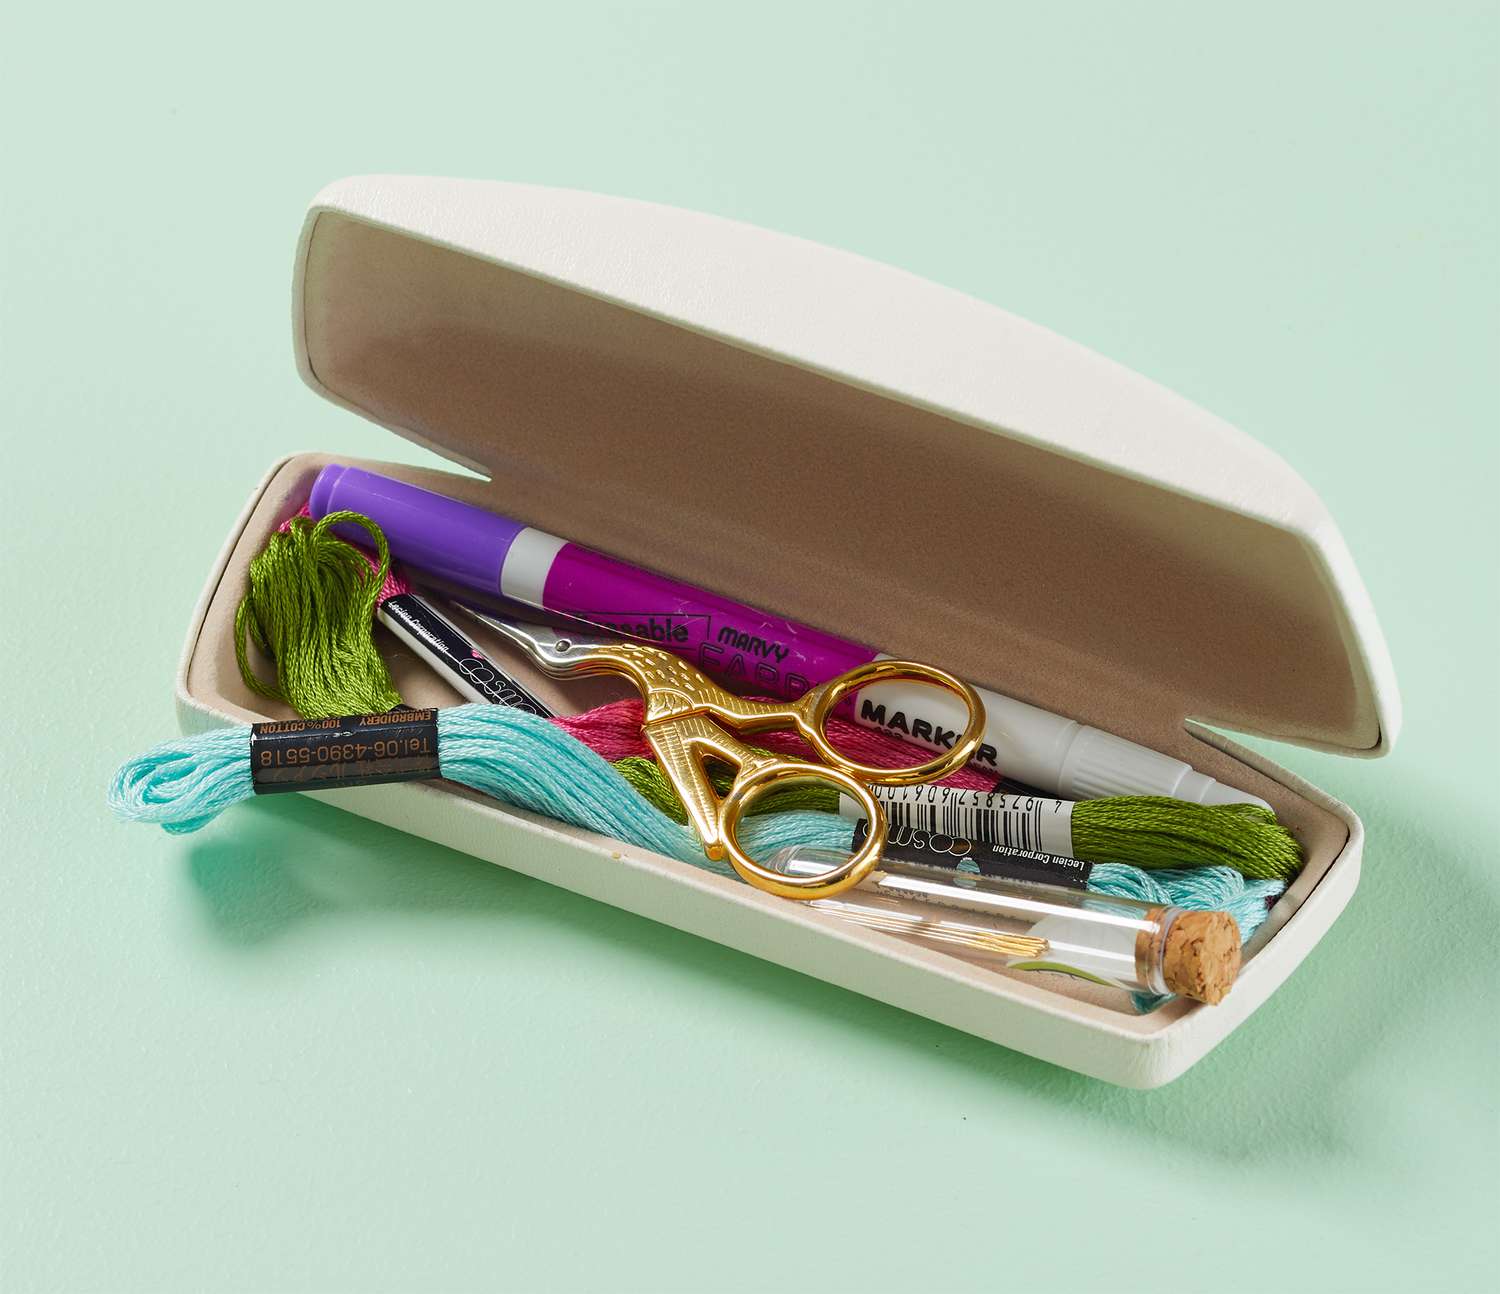 <p>Repurpose a hard-shell eyeglass case as a carrier for embroidery supplies. The case is long enough to contain embroidery floss, snips, needles, and a marking tool, and the hard exterior keeps sharp objects from poking through.</p>
                            